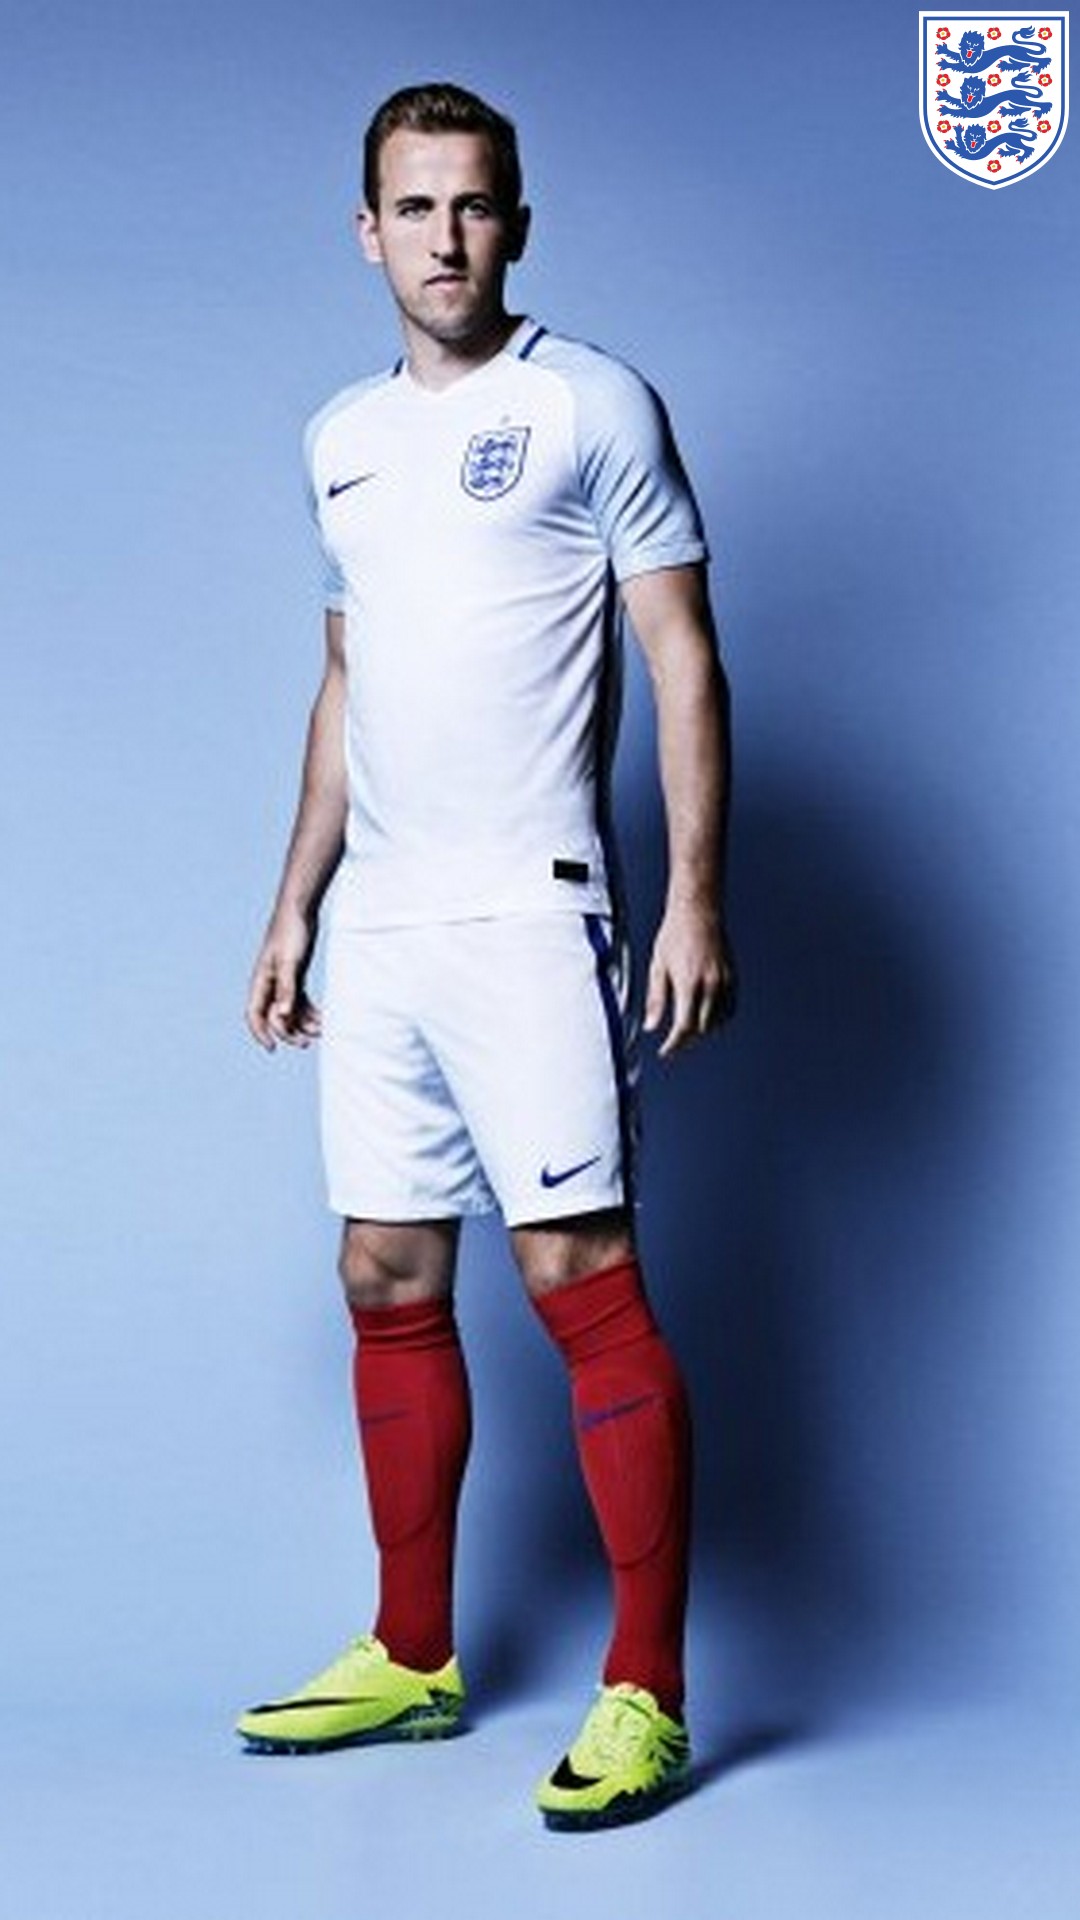 England Football Squad HD Wallpaper For iPhone With high-resolution 1080X1920 pixel. You can use this wallpaper for your Desktop Computers, Mac Screensavers, Windows Backgrounds, iPhone Wallpapers, Tablet or Android Lock screen and another Mobile device